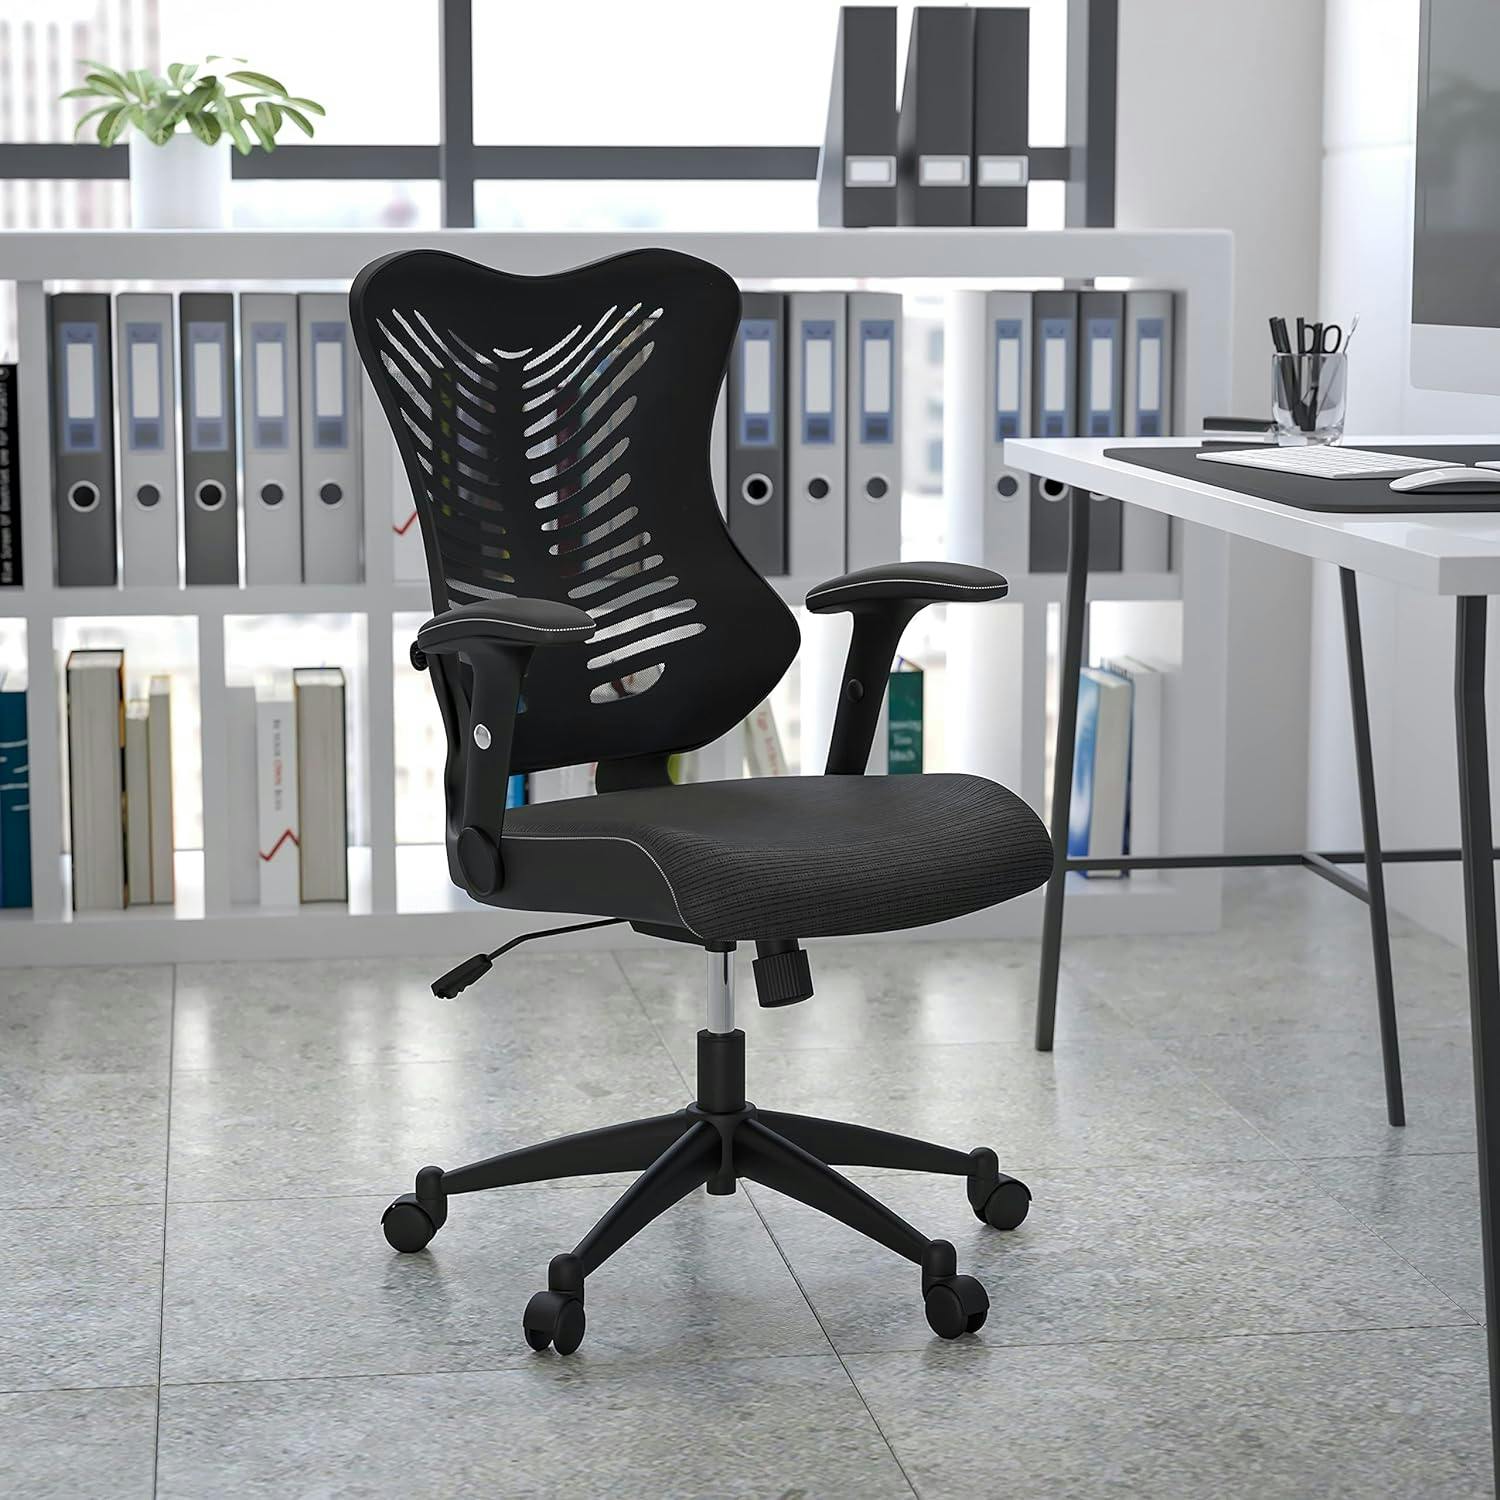 Contemporary High-Back Black Mesh & Leather Executive Office Chair with Adjustable Arms